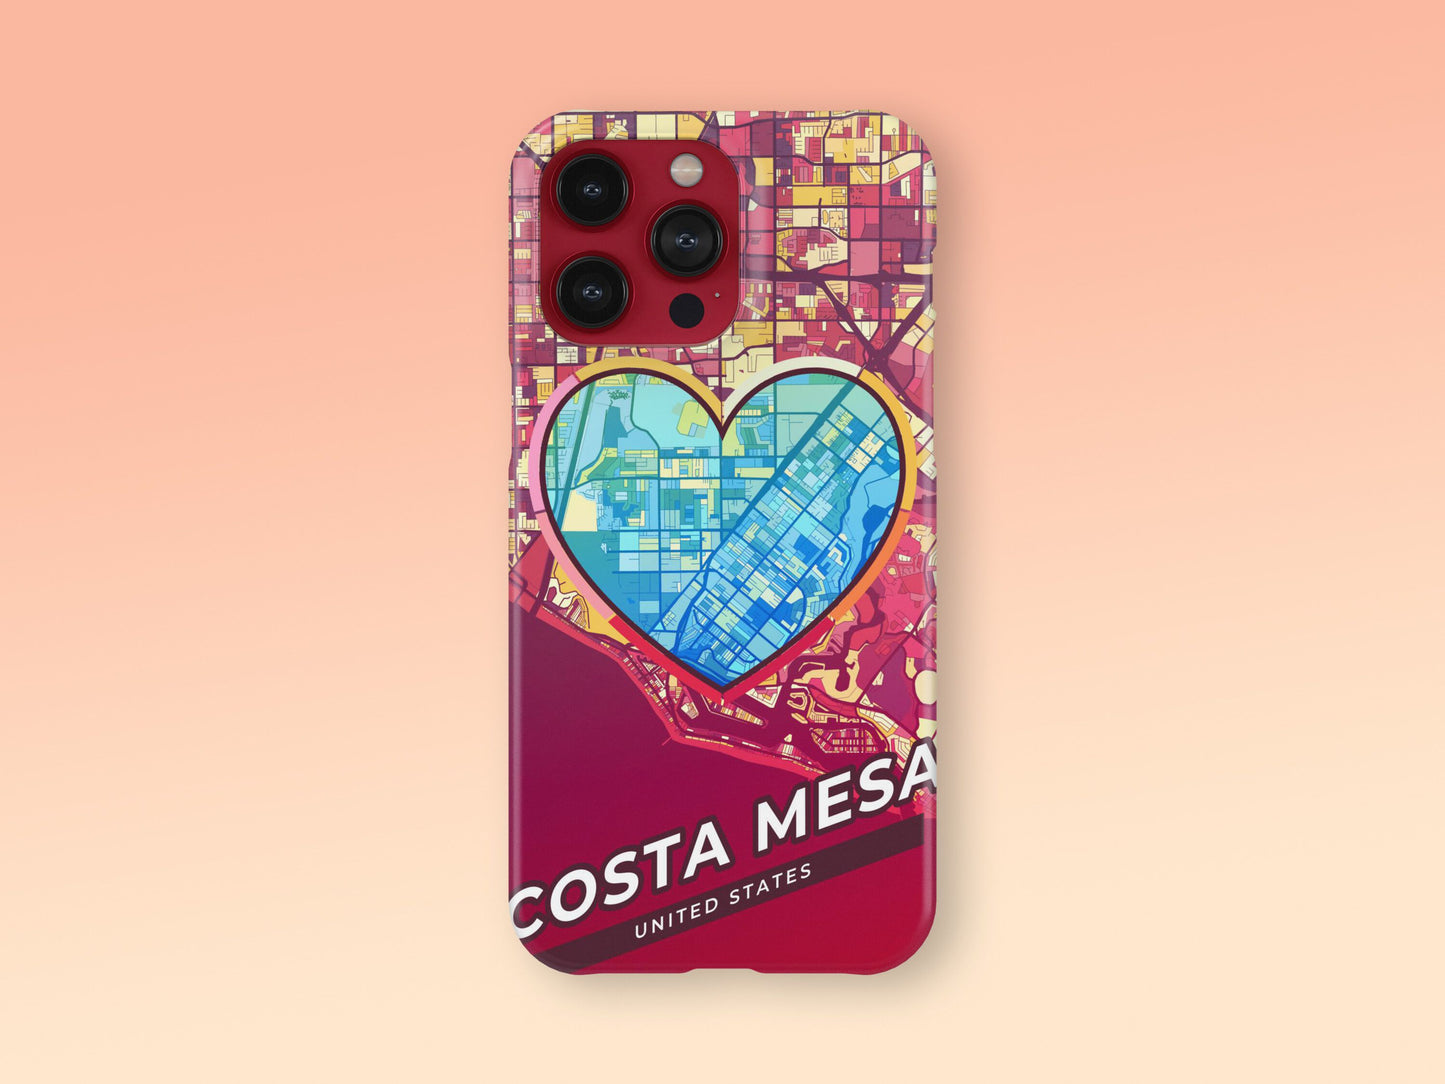 Costa Mesa California slim phone case with colorful icon. Birthday, wedding or housewarming gift. Couple match cases. 2